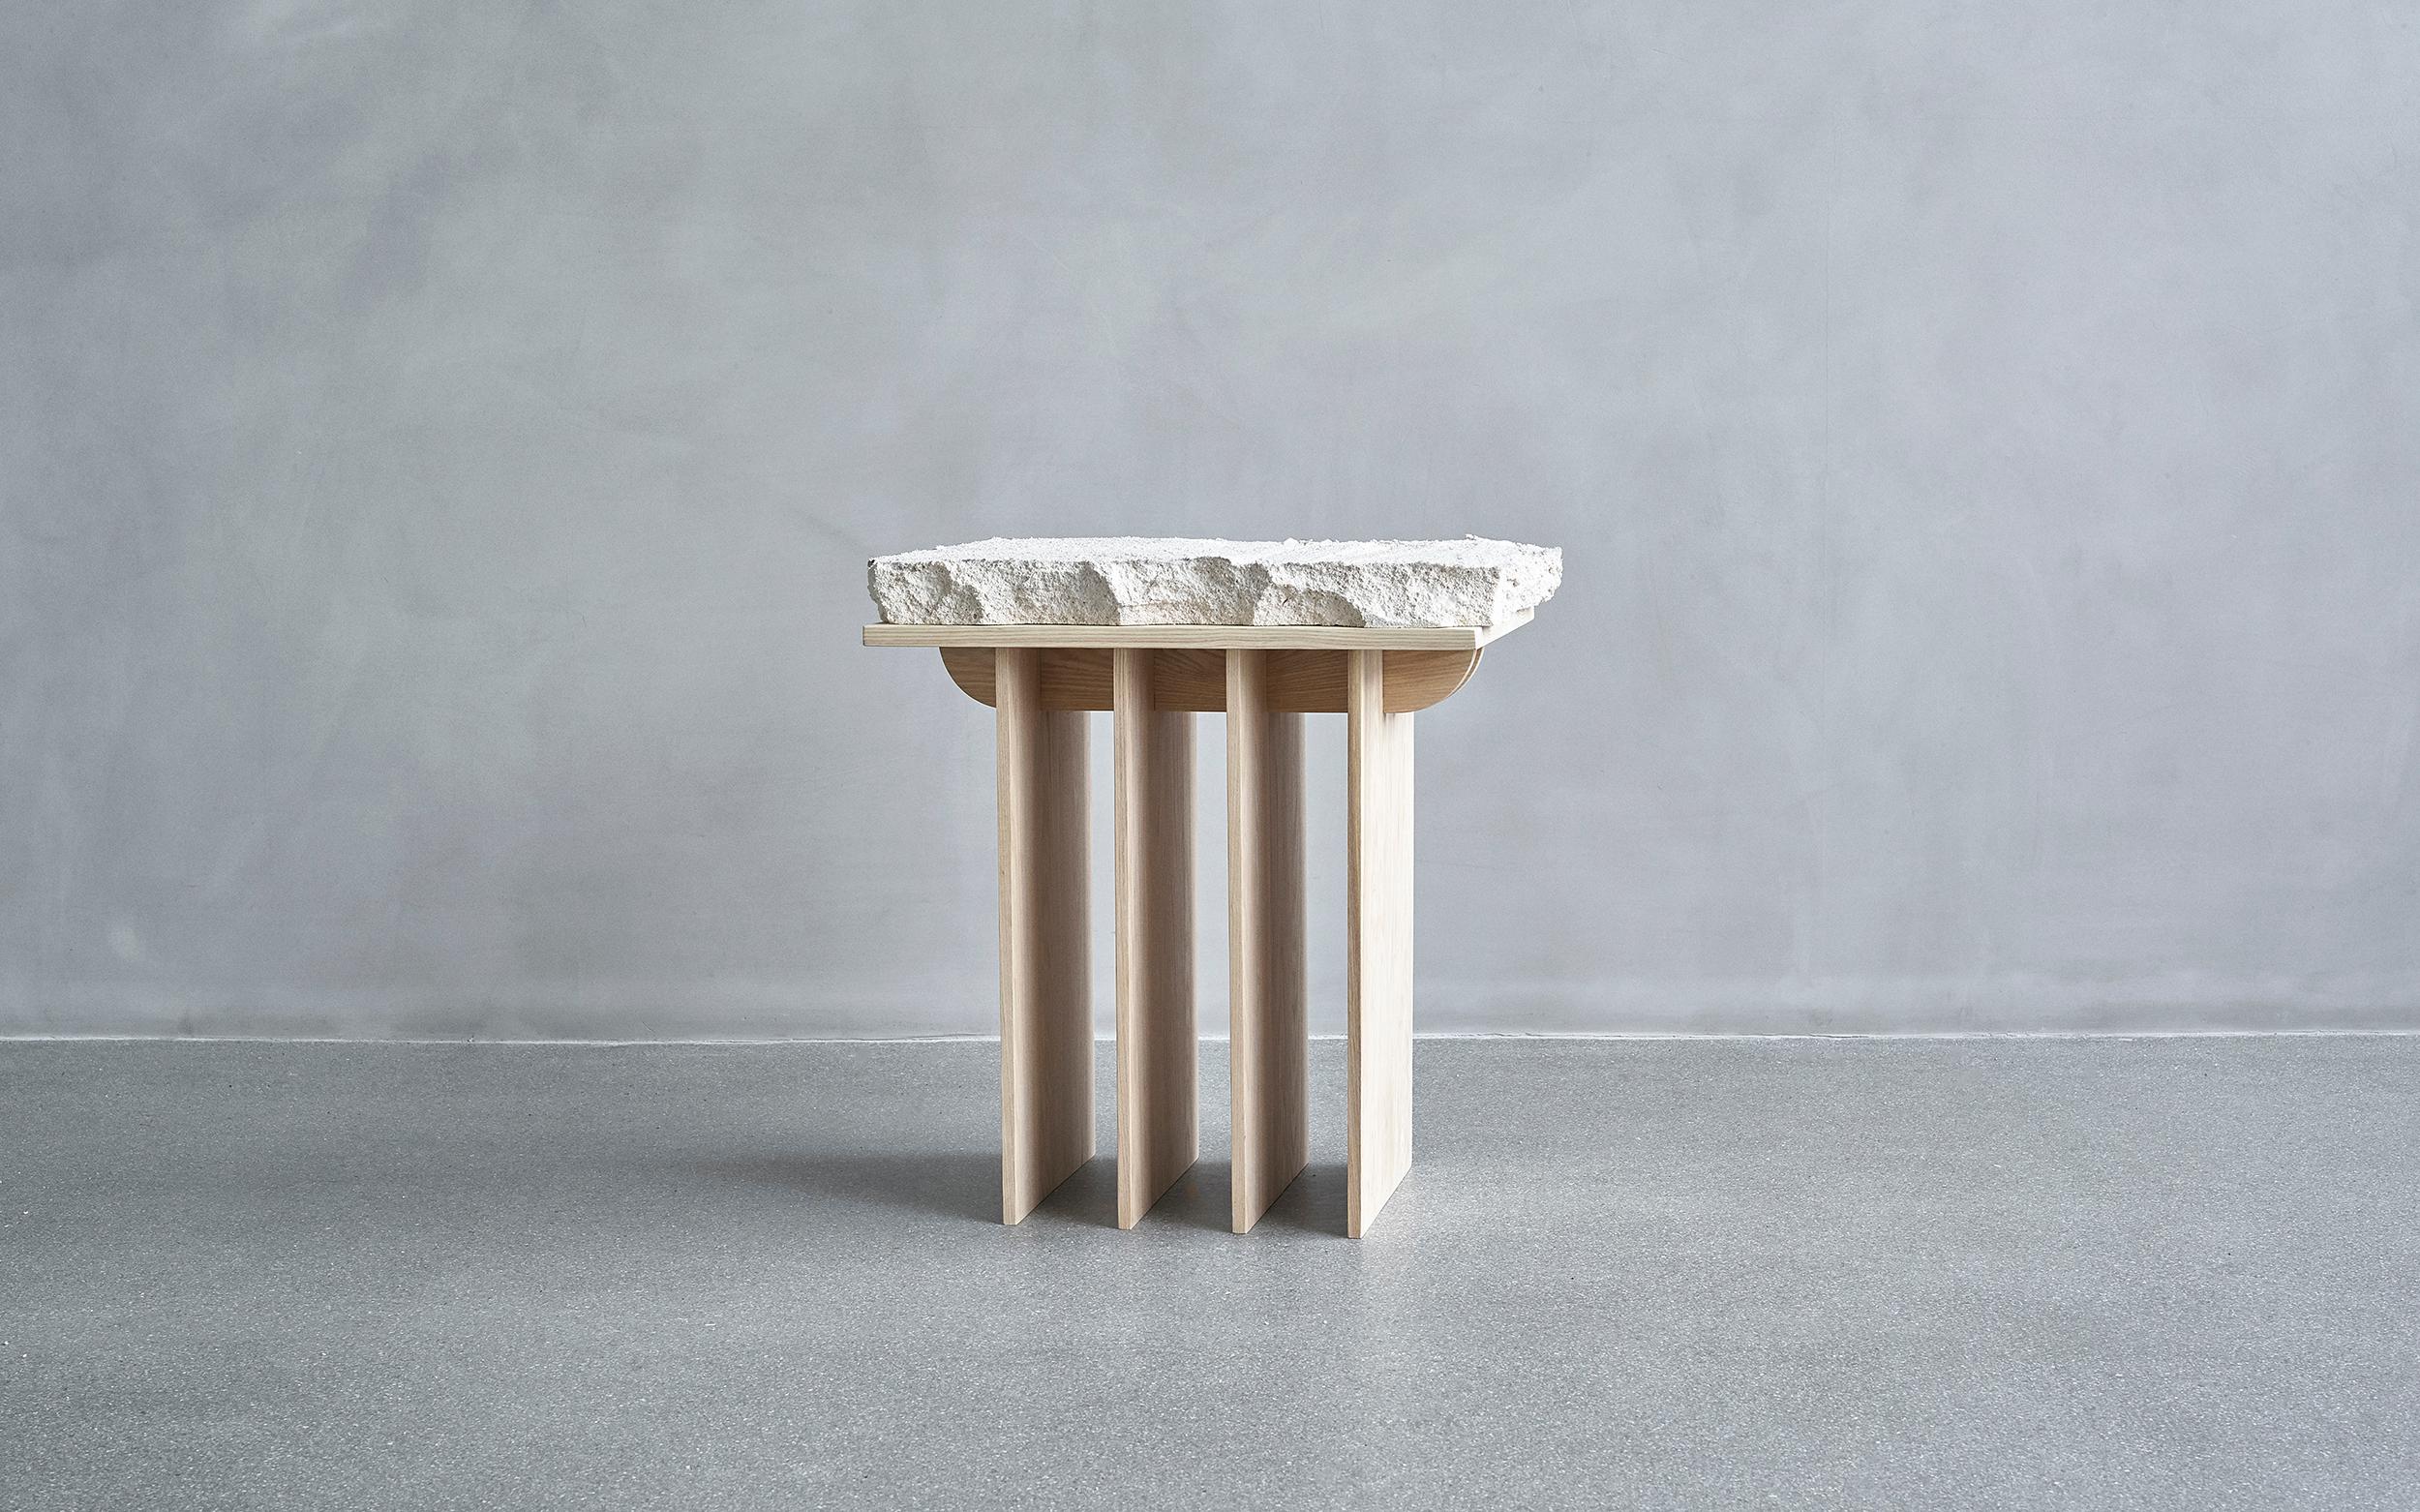 One-off a kind - Contemporary Design, Thinking space - stool, made by the art and design duo Andredottir & Bobek

They have in this collection imitated landscape with artificial materials and created an artificial scene of nature because art and